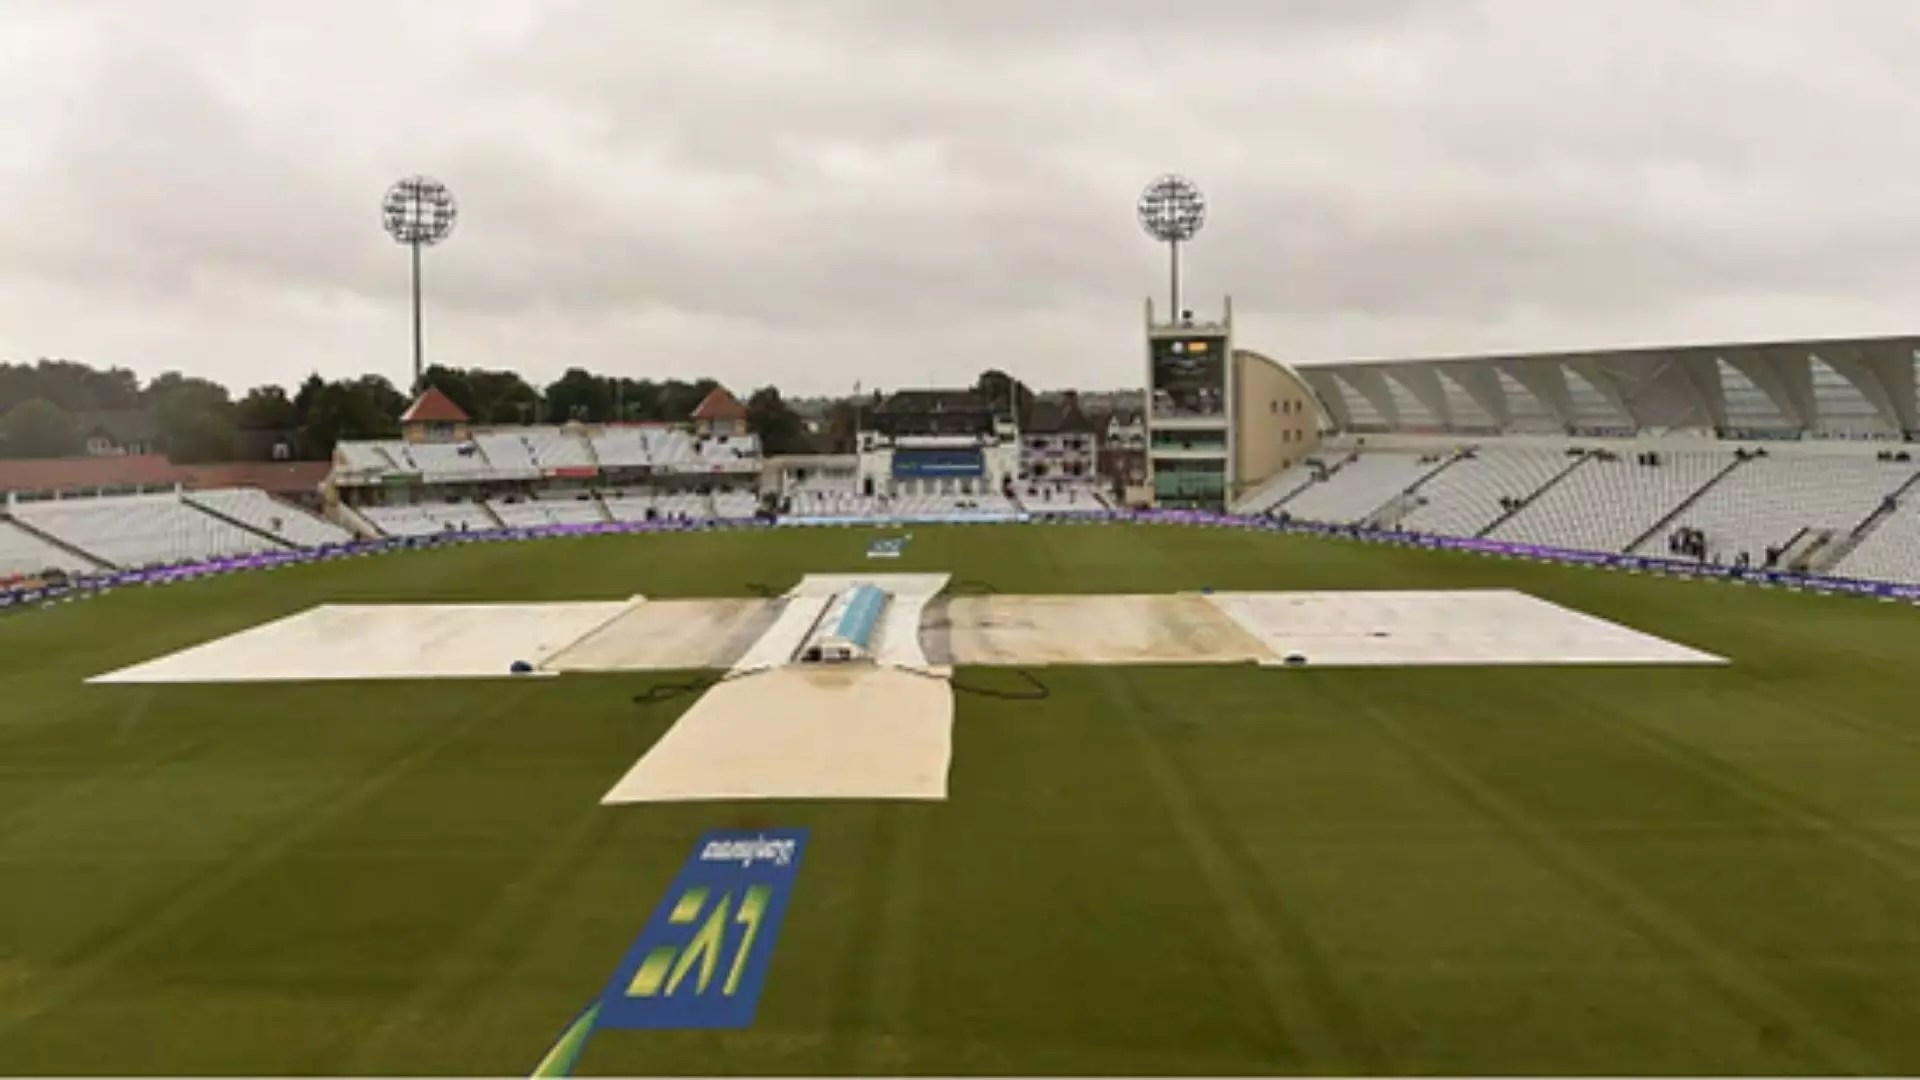 India Vs England First Test Match Abandoned Fifth Day And Match Ends With Drawn